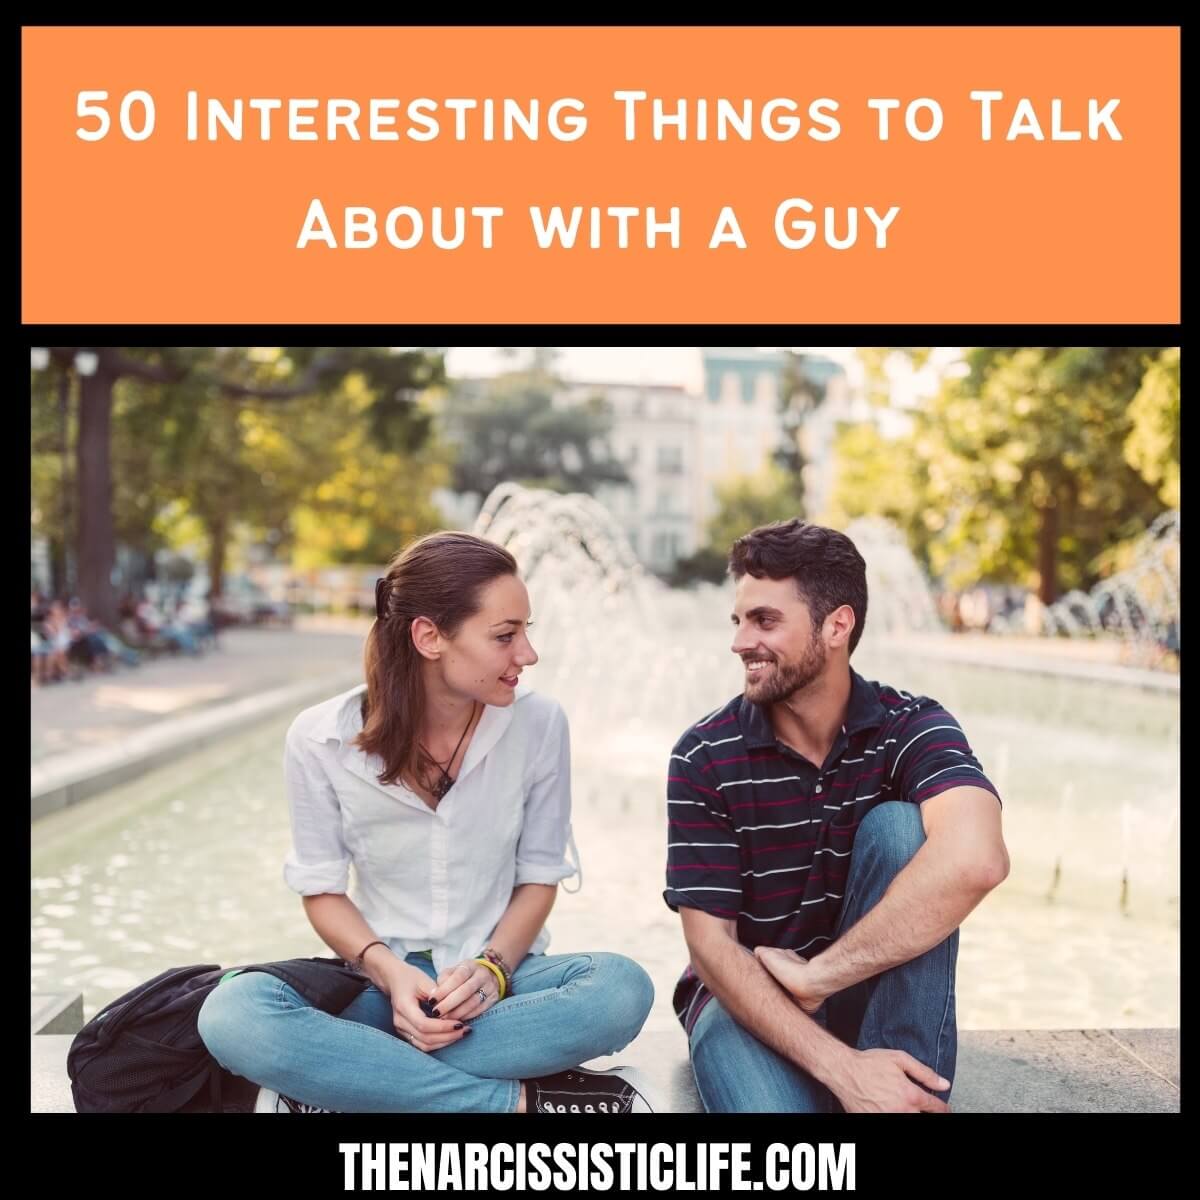 50 Interesting Things to Talk About with a Guy